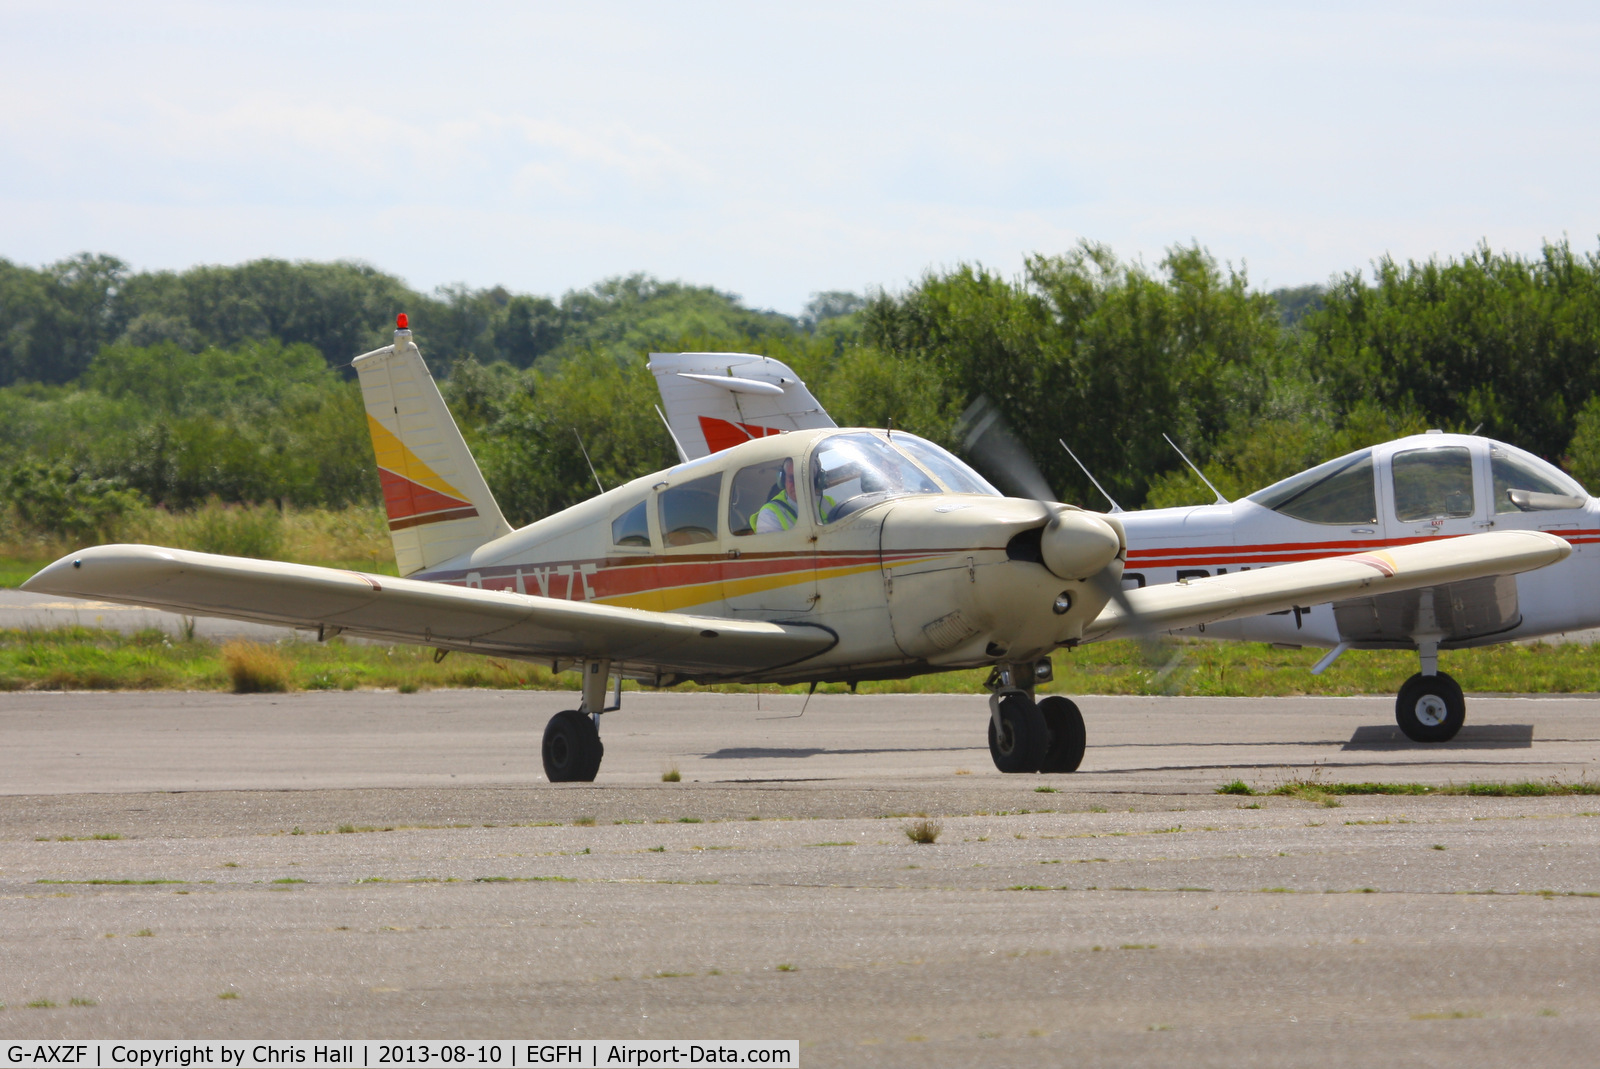 G-AXZF, 1970 Piper PA-28-180 Cherokee E C/N 28-5688, privately owned